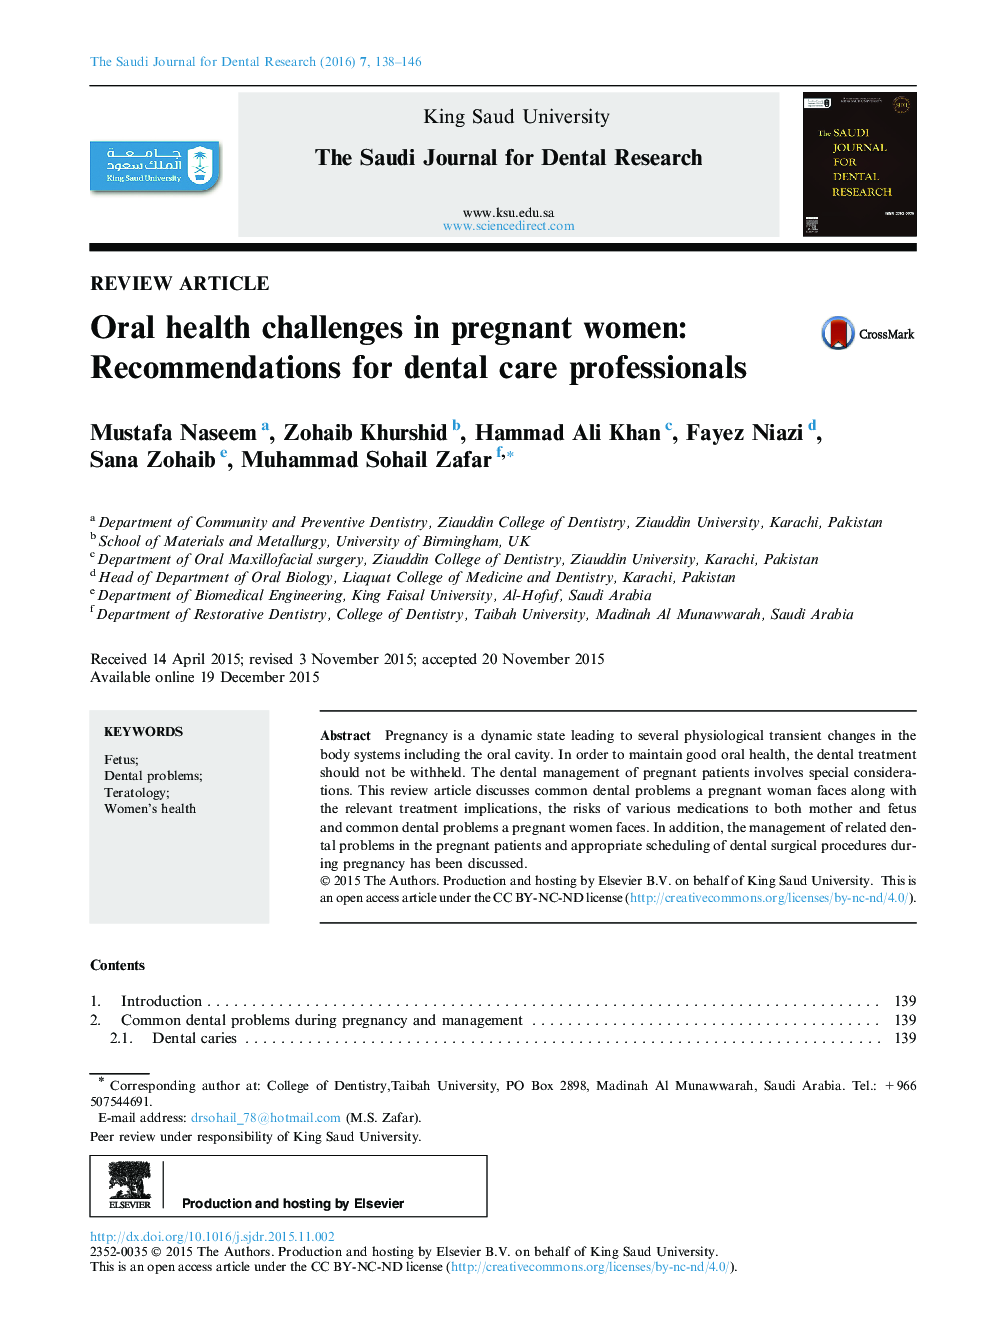 Oral health challenges in pregnant women: Recommendations for dental care professionals 